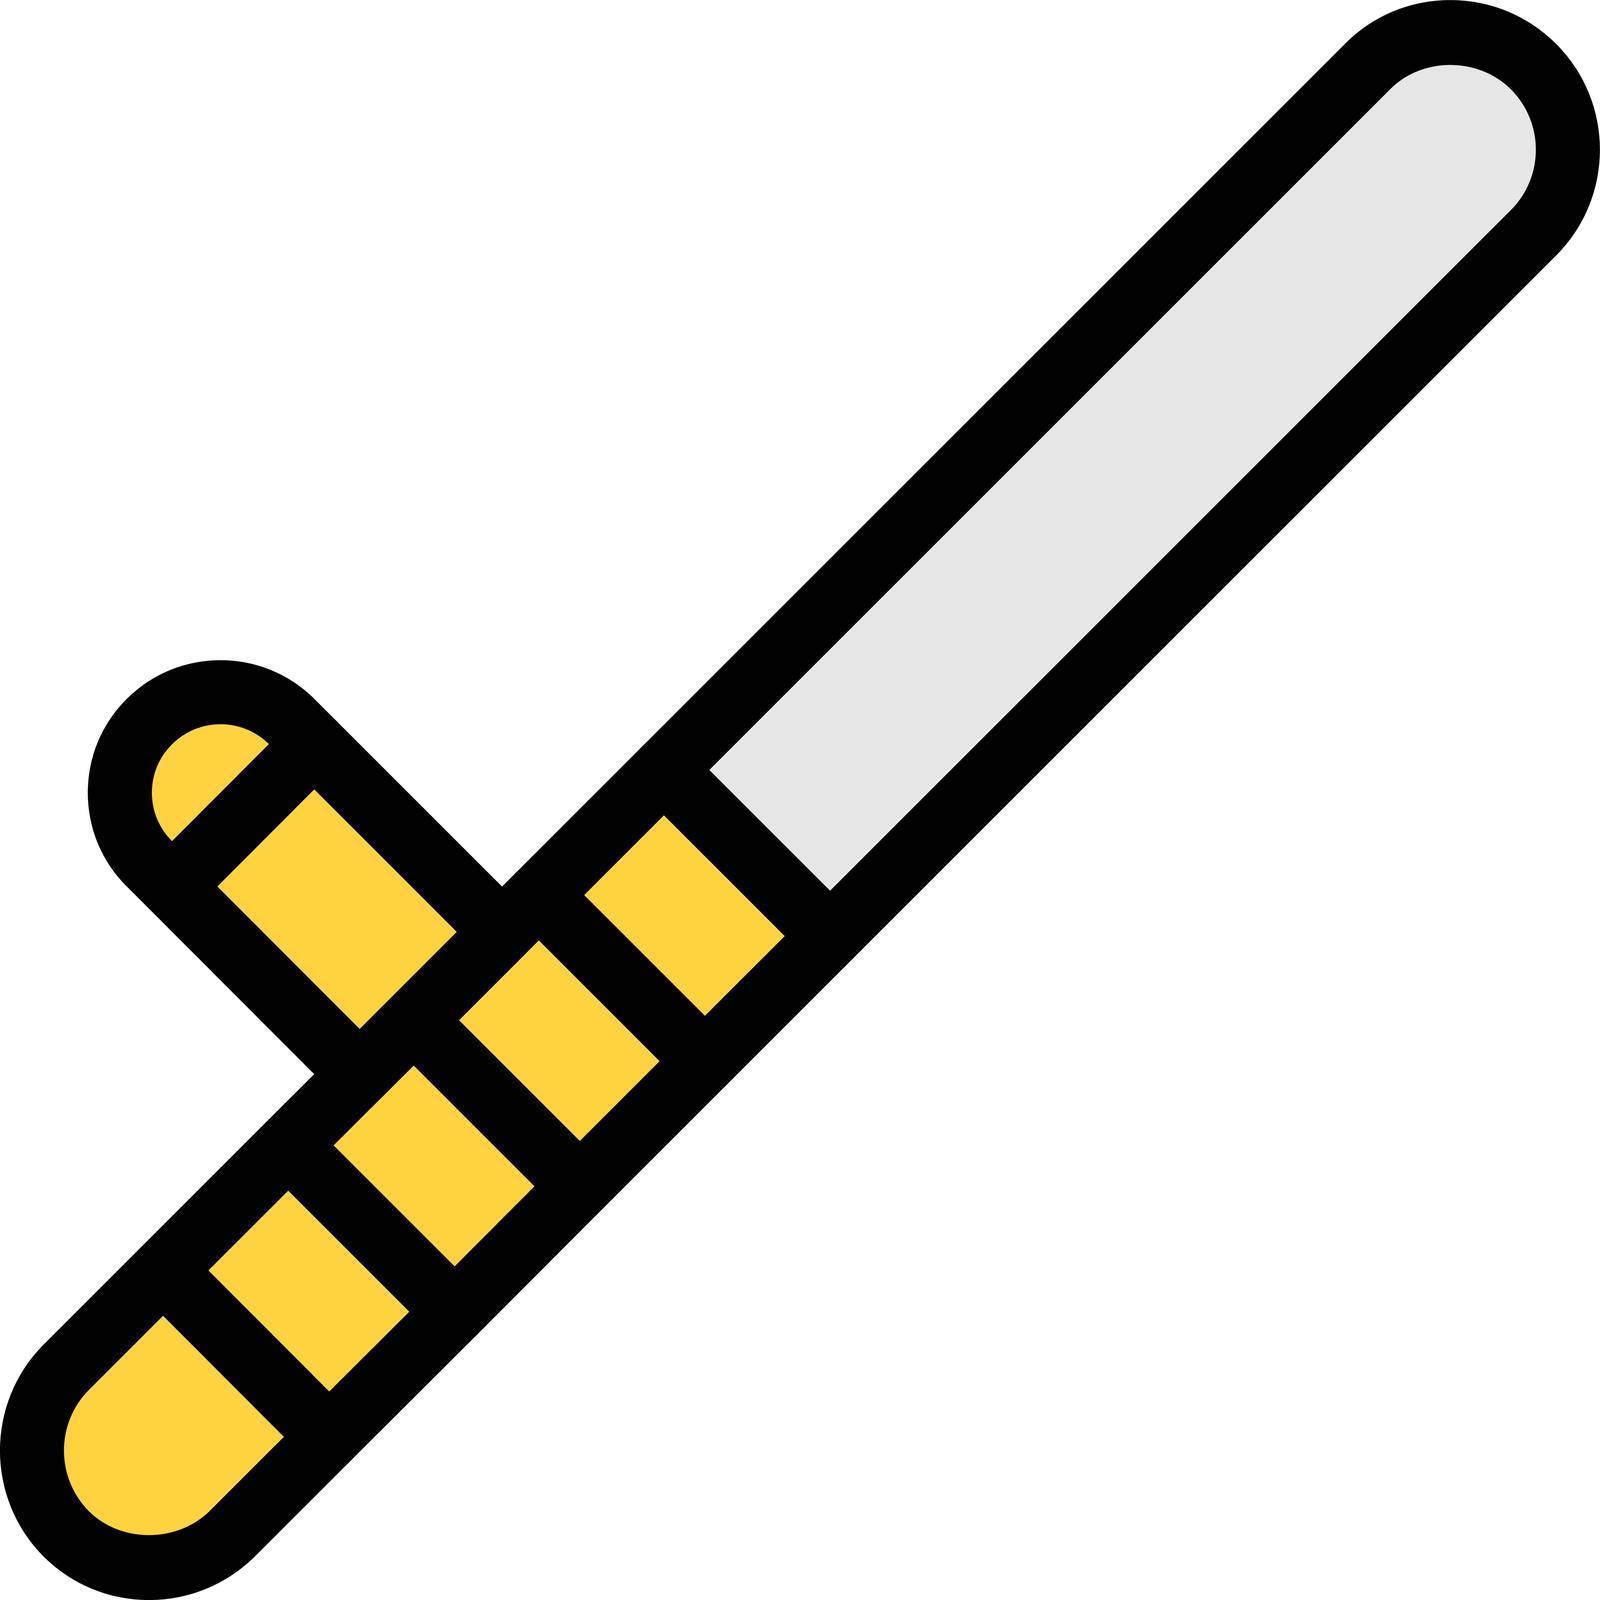 baton vector illustration isolated on a transparent background . storke vector icons for concept or web graphics.